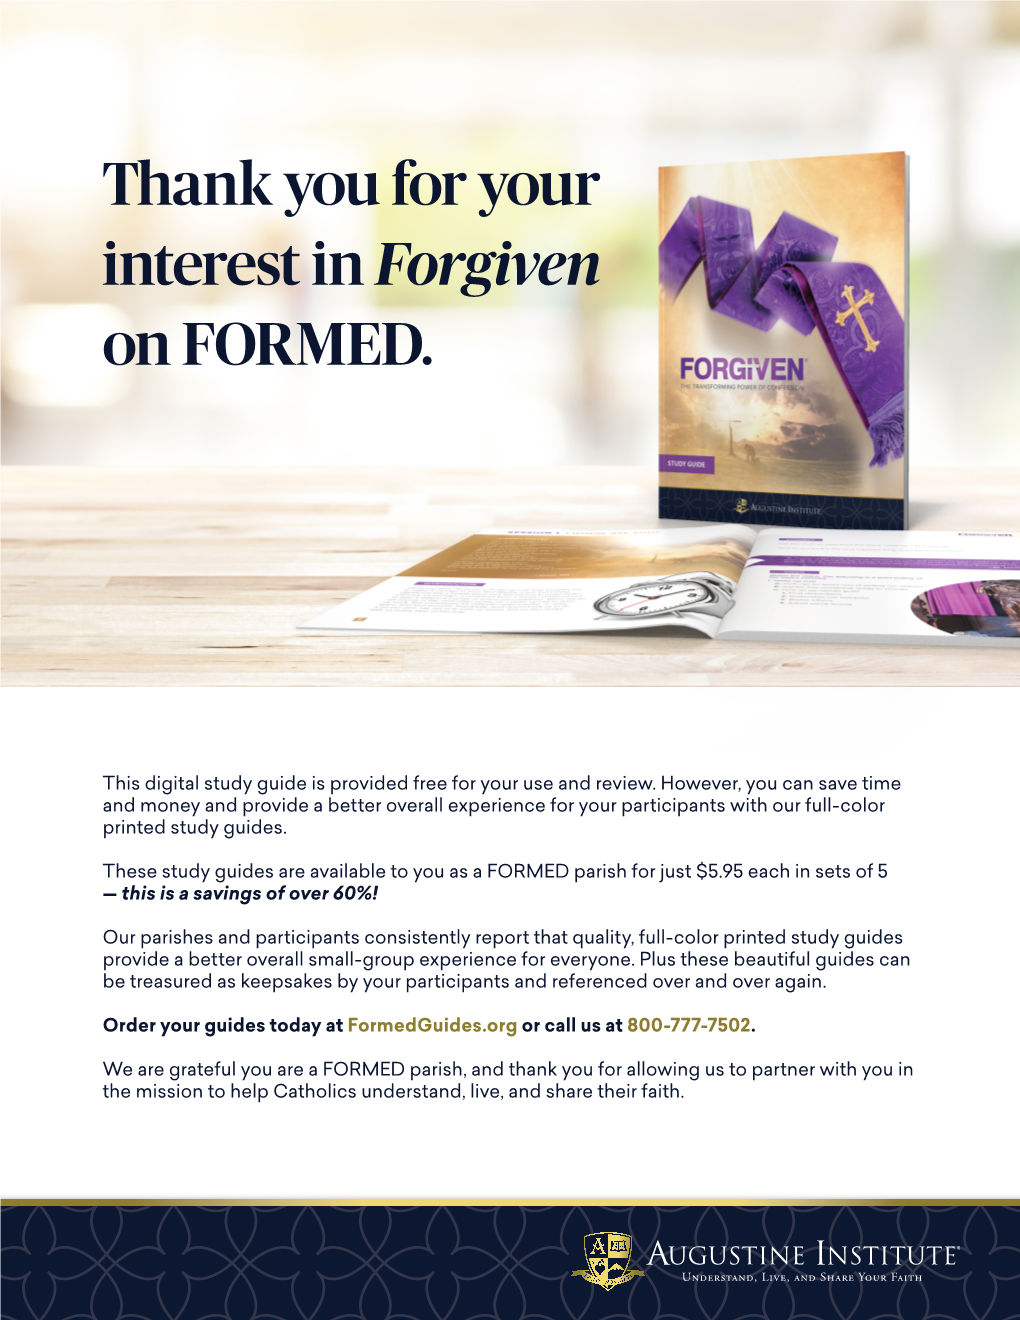 Thank You for Your Interest in Forgiven on FORMED